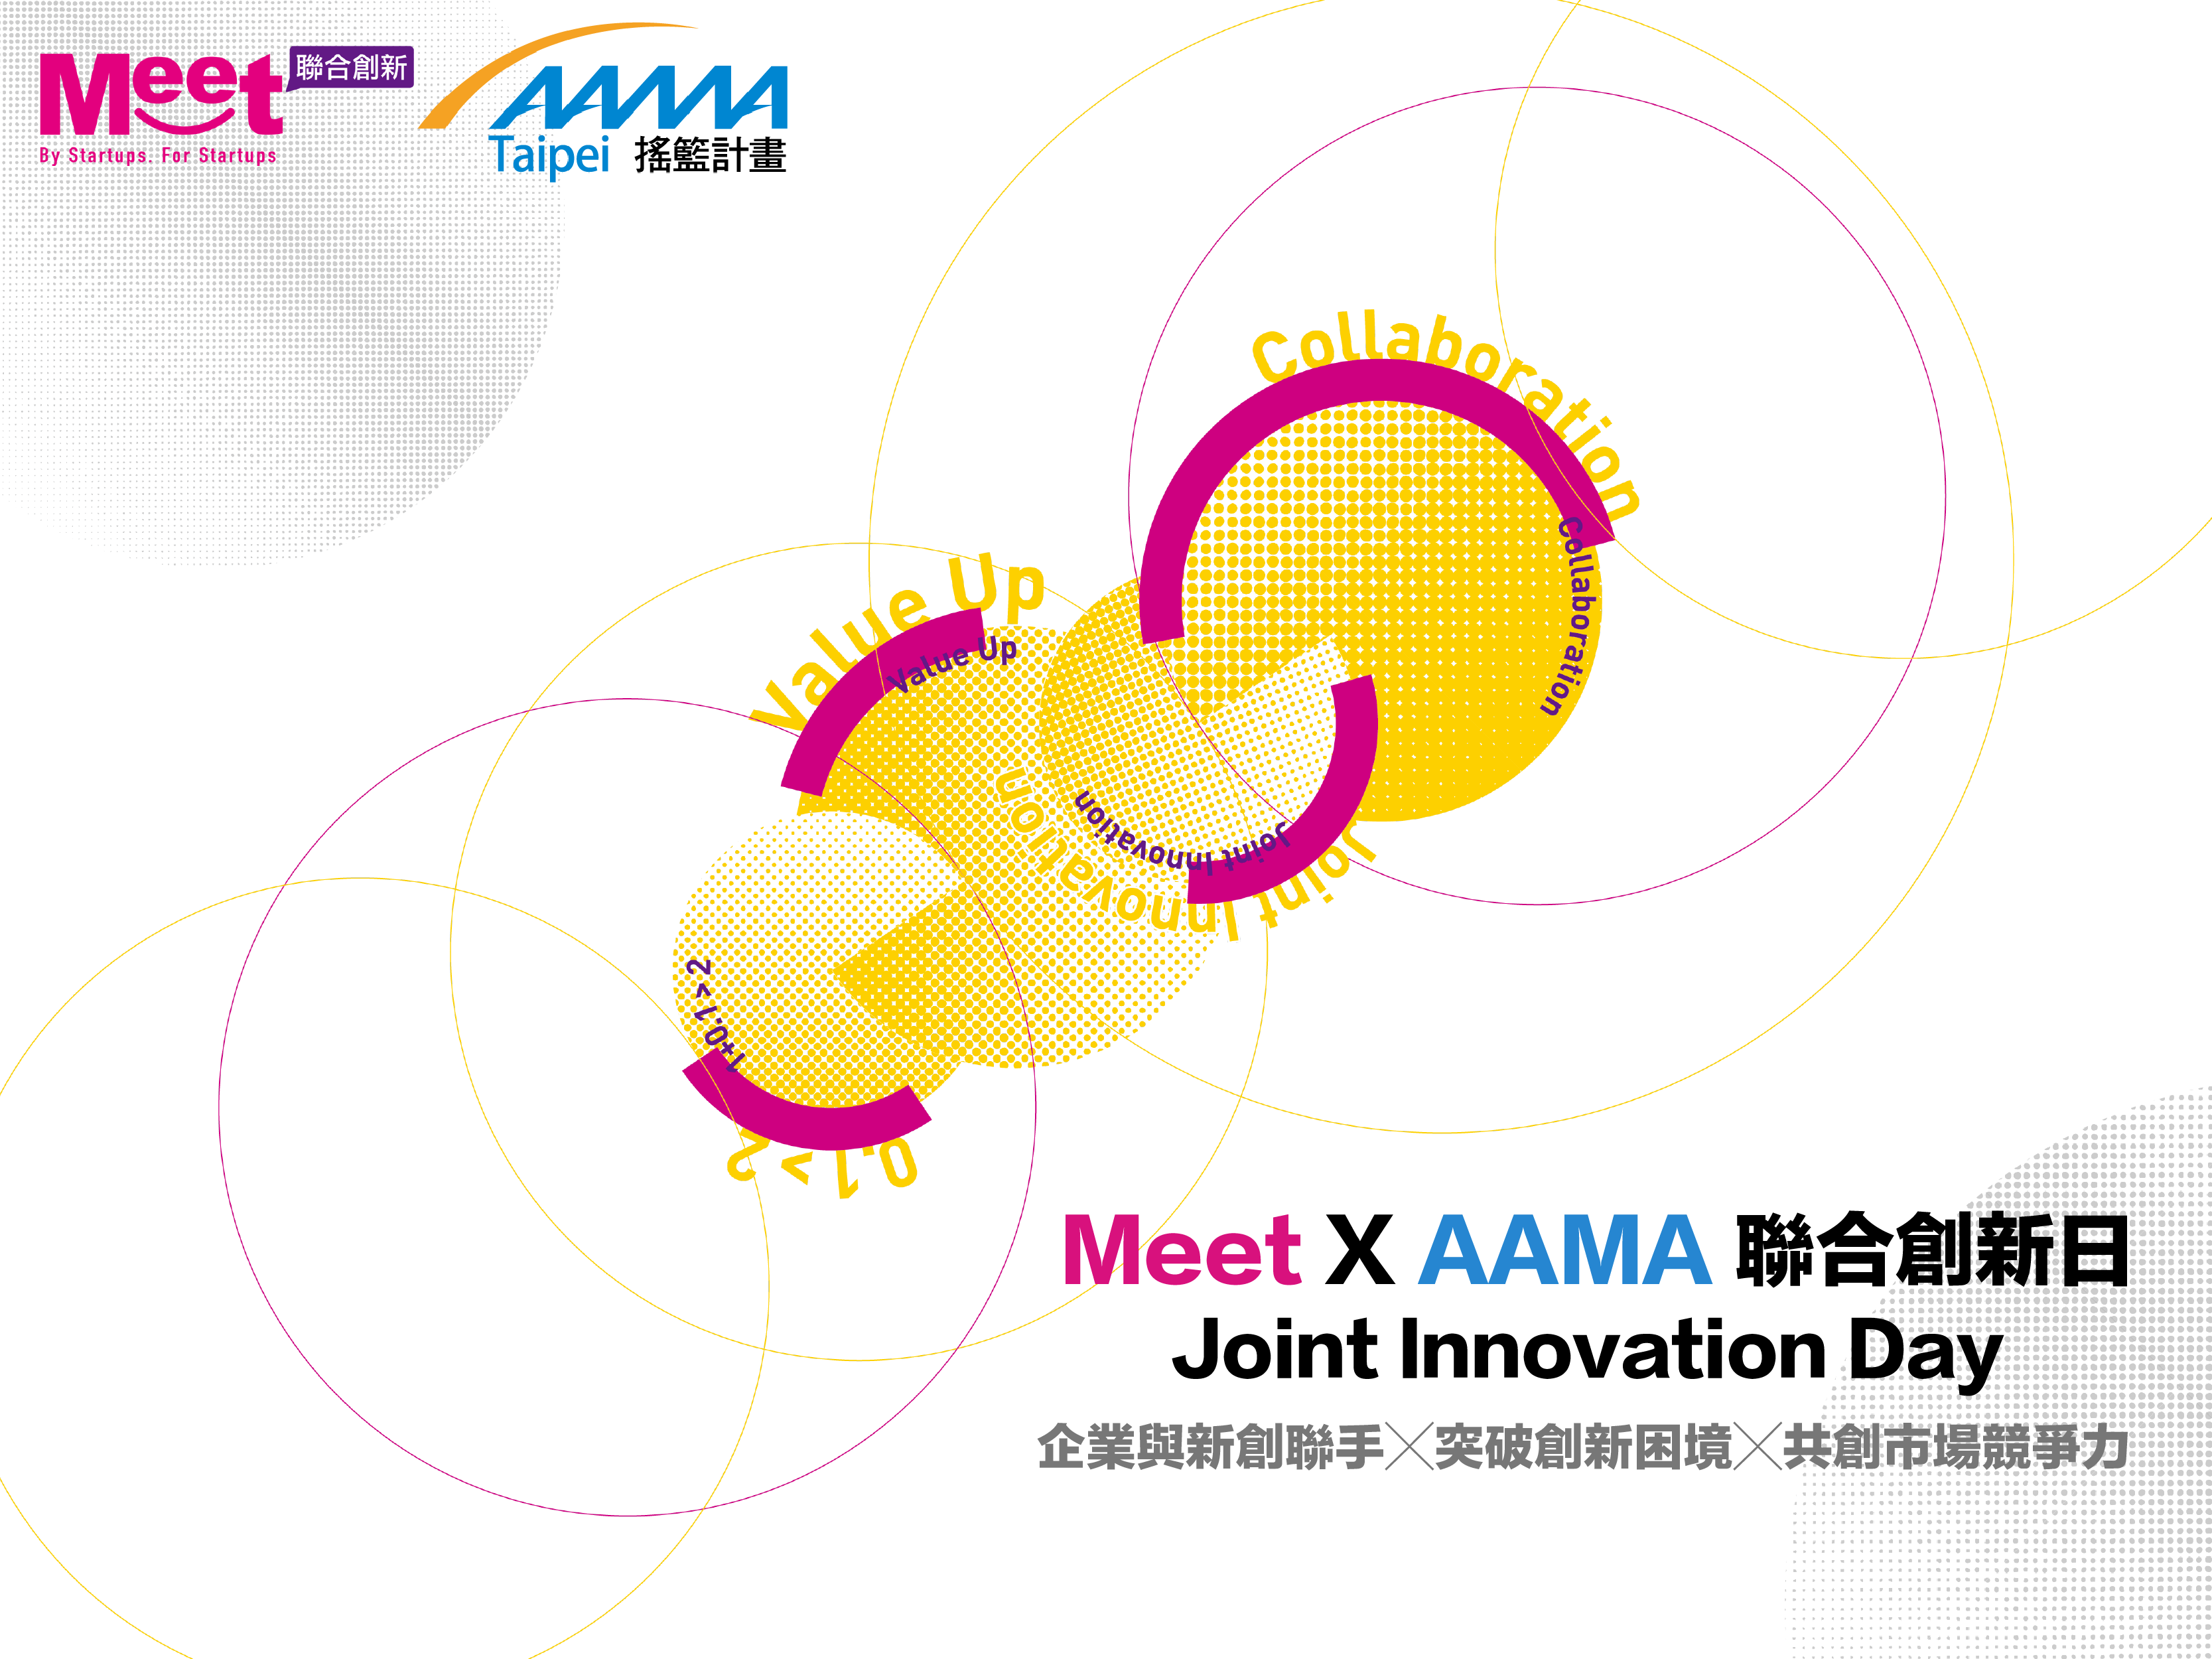 Meet X AAMA Joint Innovation Day 